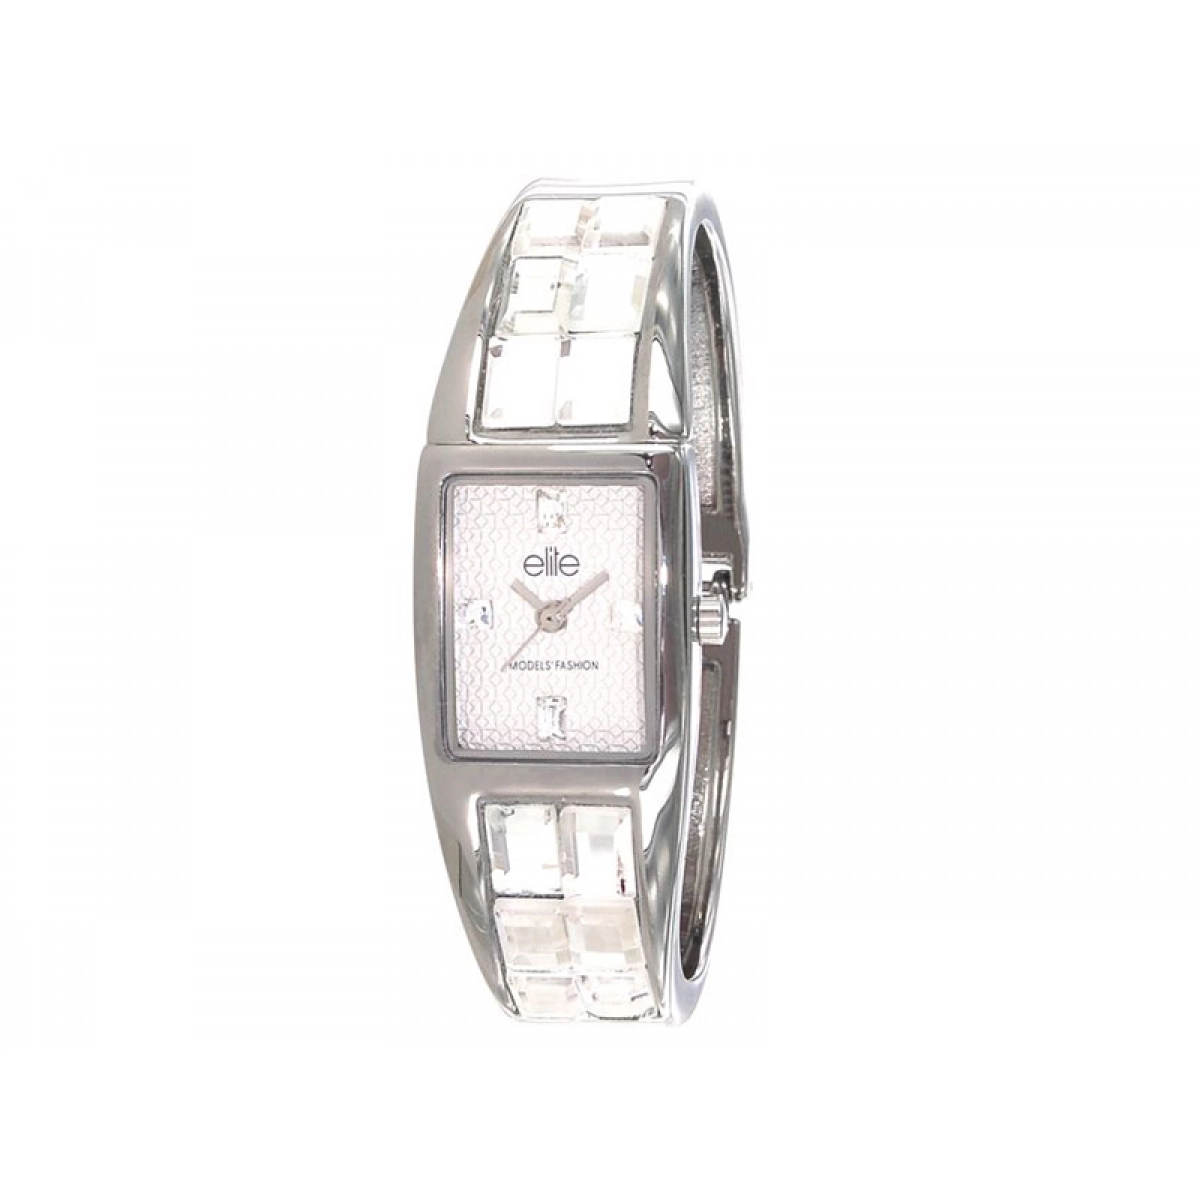 Watch elite steel and crystals E53104-201